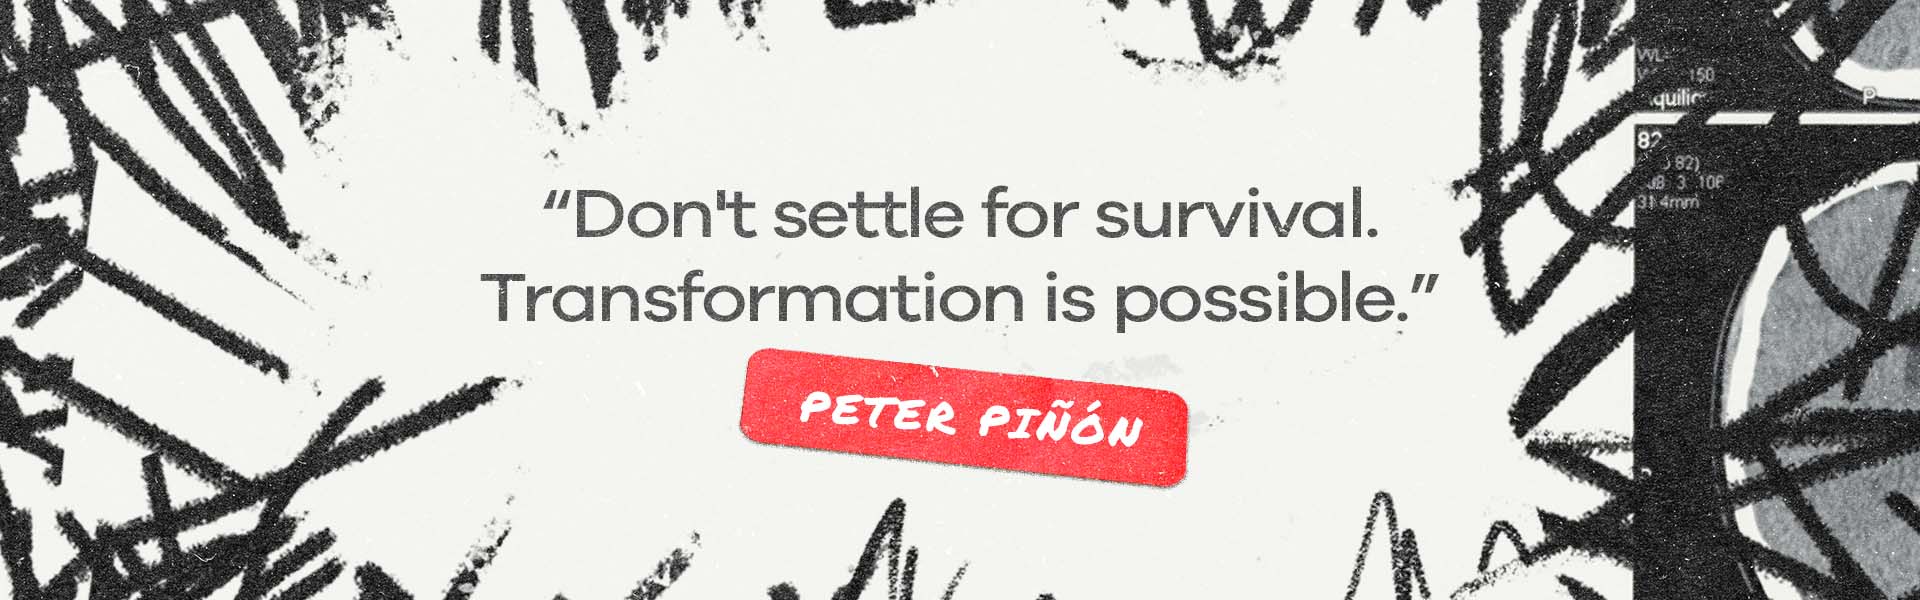 Peter Pinion quote image